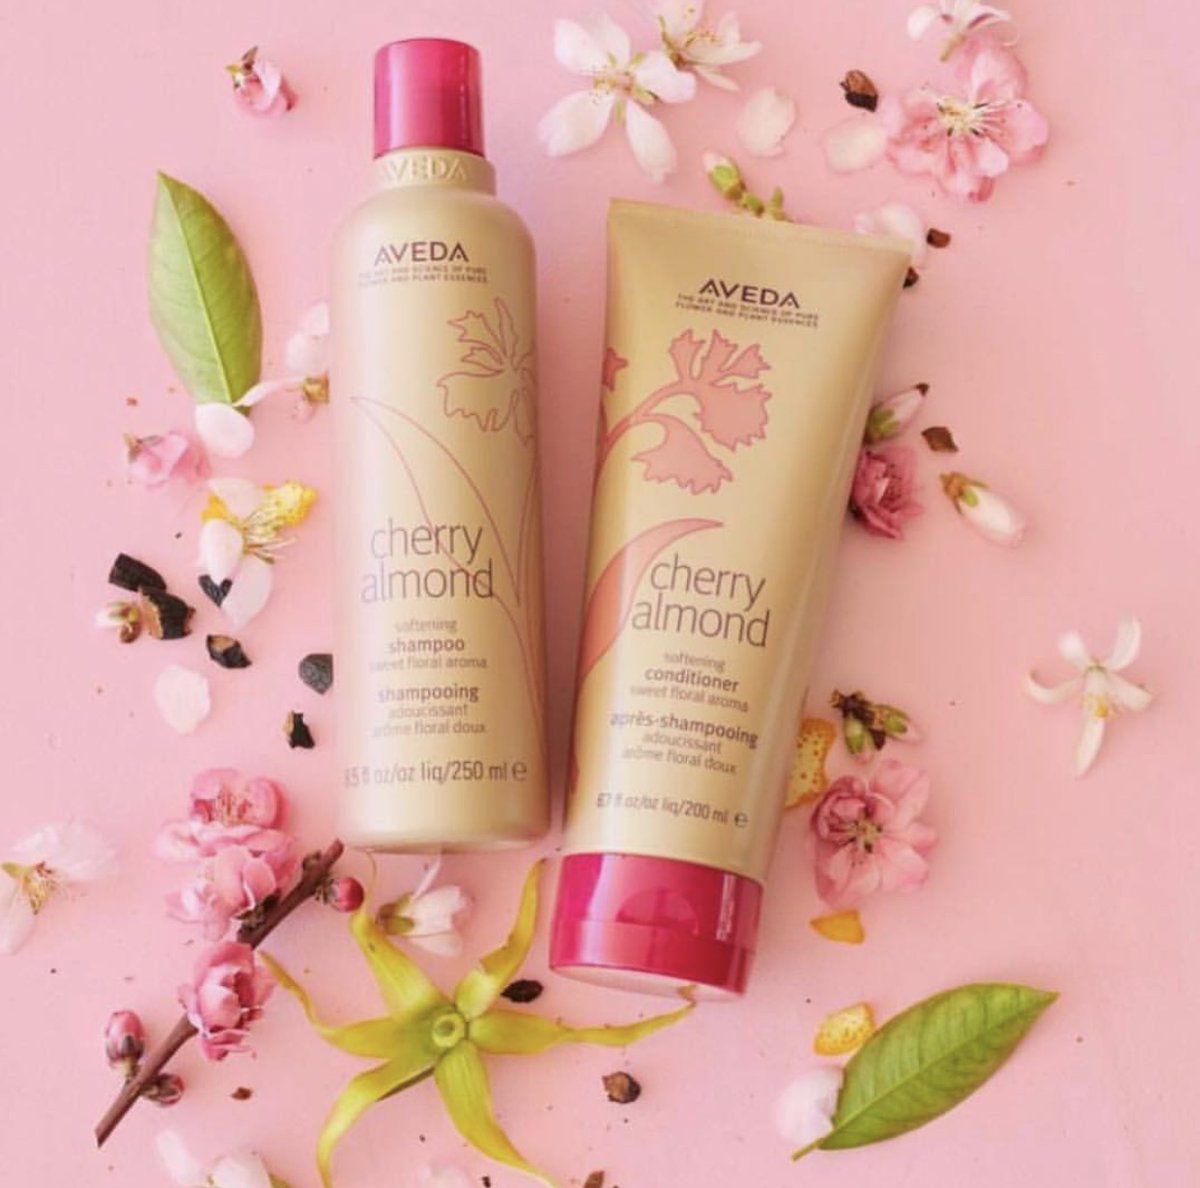 Have you smelled our cherry almond aroma?
It's.... delicious! 💕🍒🌸
Leave us a comment if you've experienced this amazing scent and let our other guests know how amazing it it! #Aveda #aisouth #CherryAlmond #SmellsLikeAveda #AvedaProducts #Shampoo #haircare #NaturalHaircare